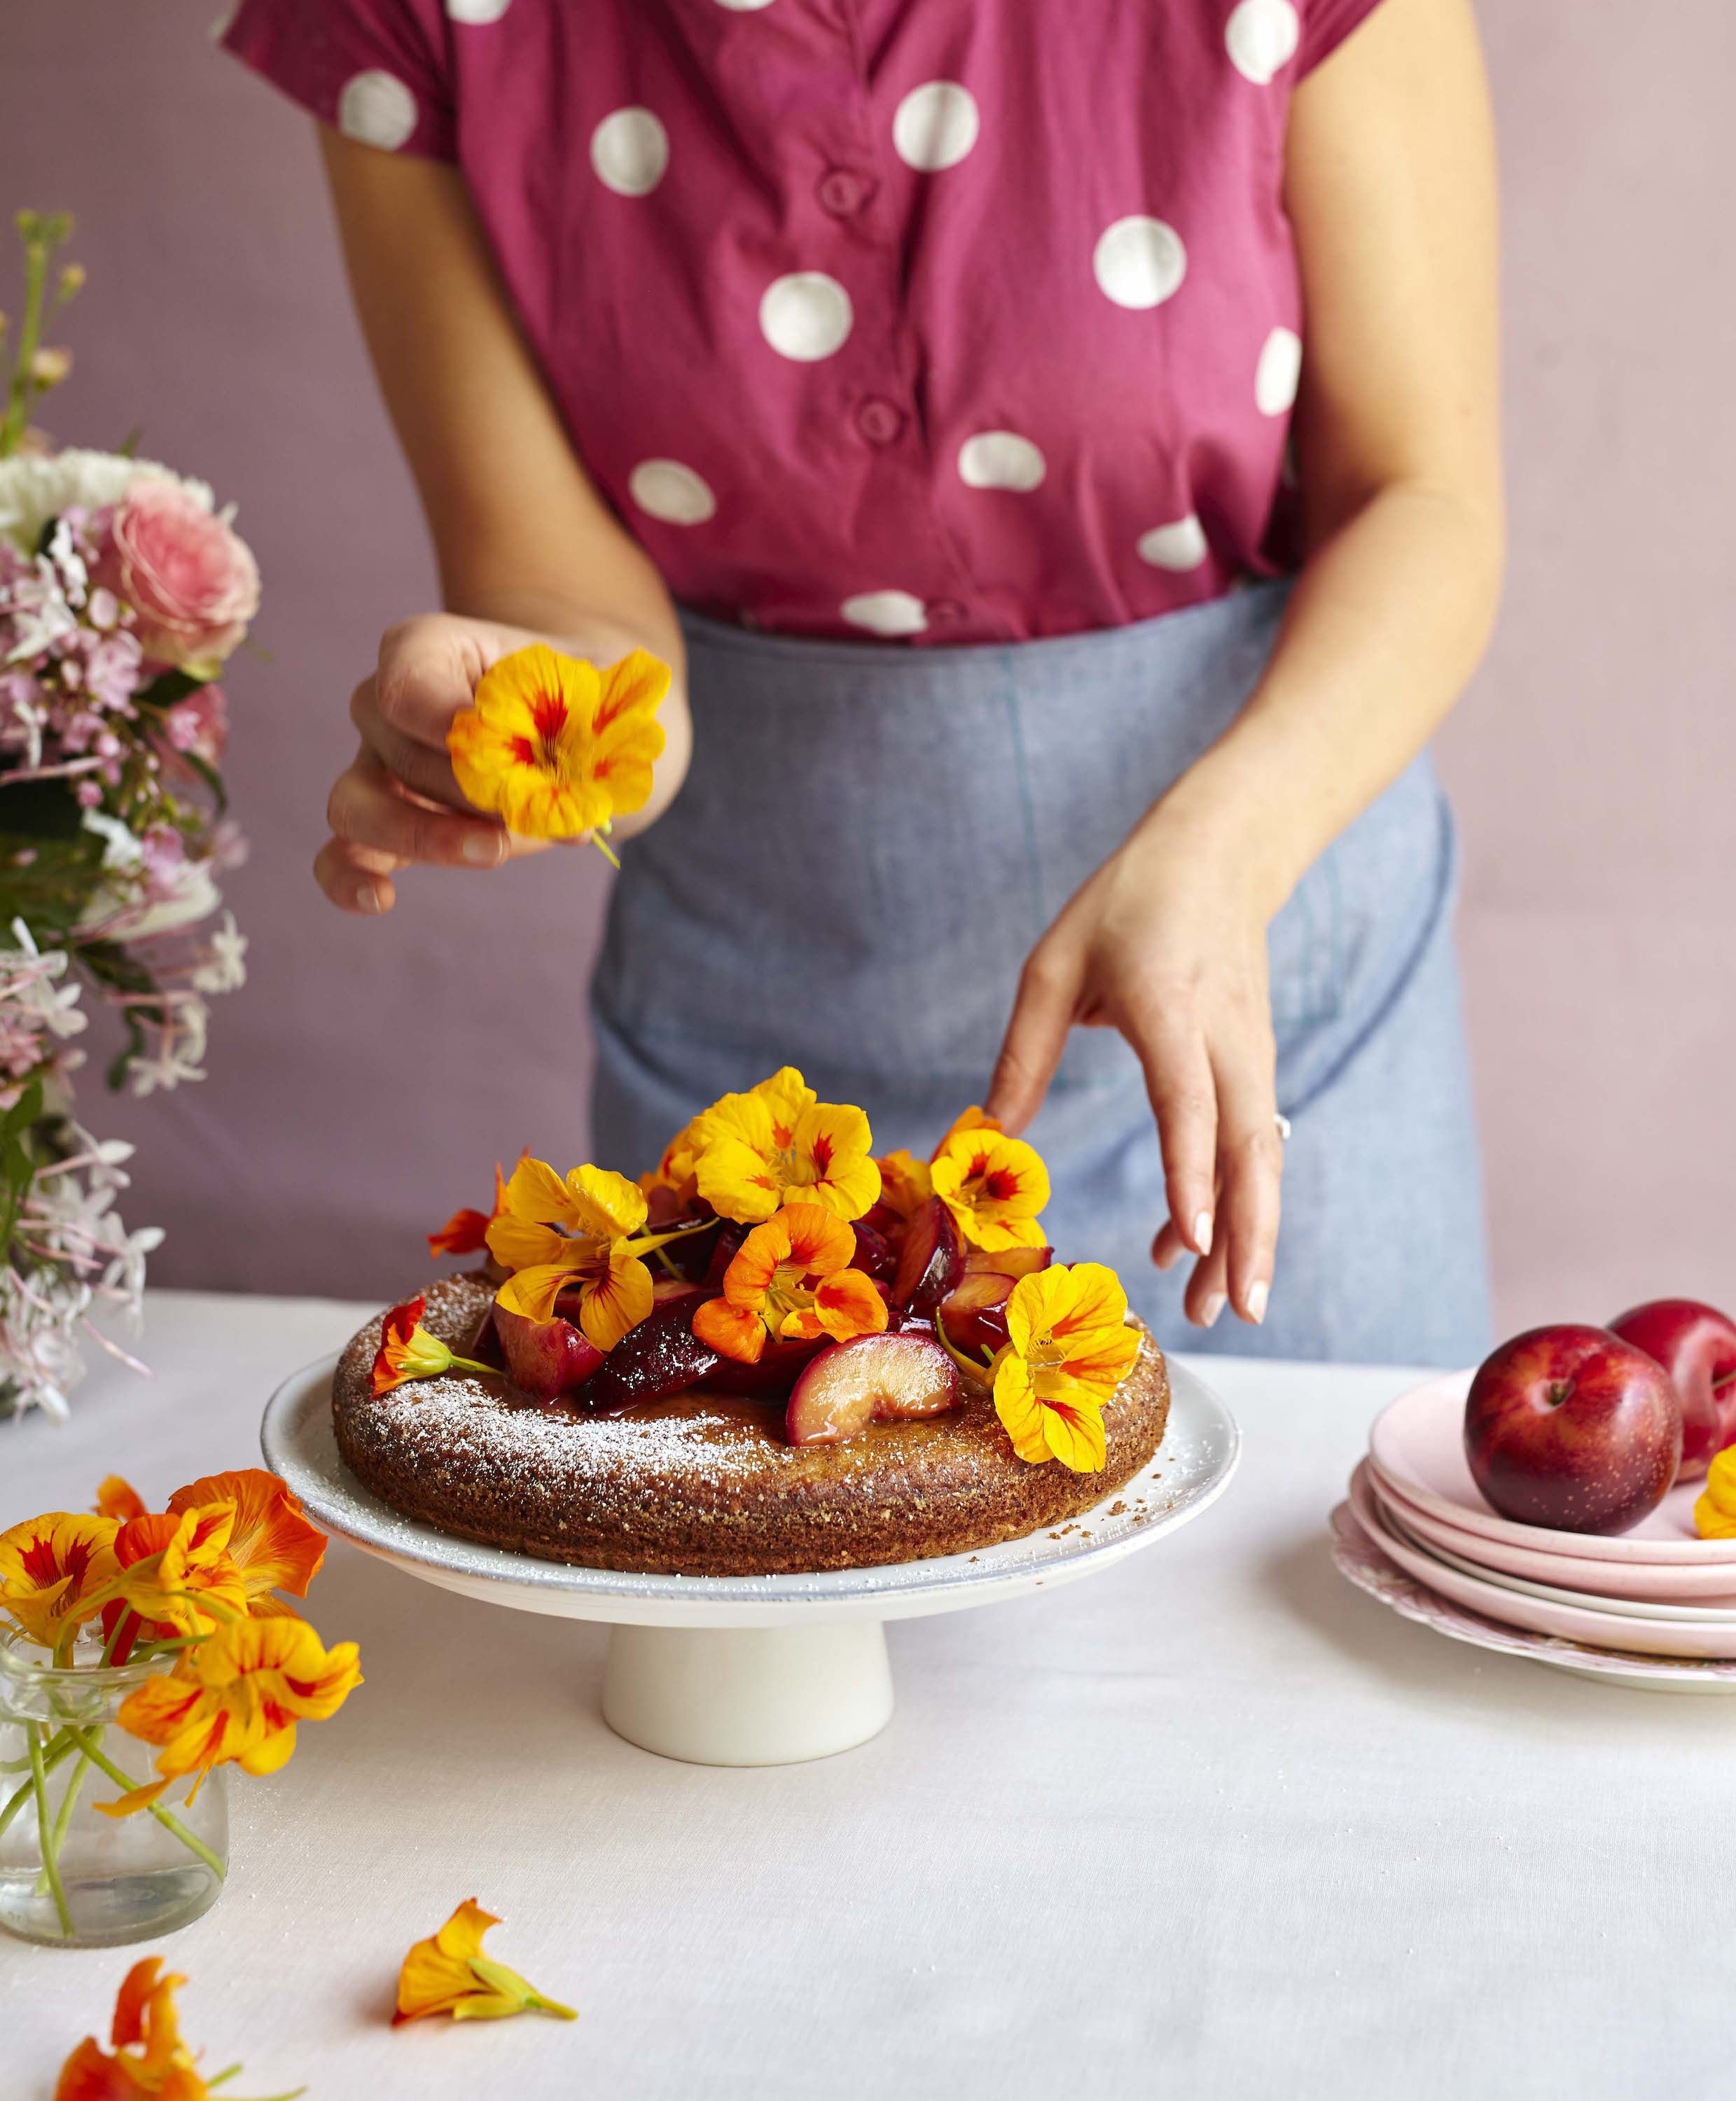 Edible Flowers to Embellish Your Valentine's Day Menu!